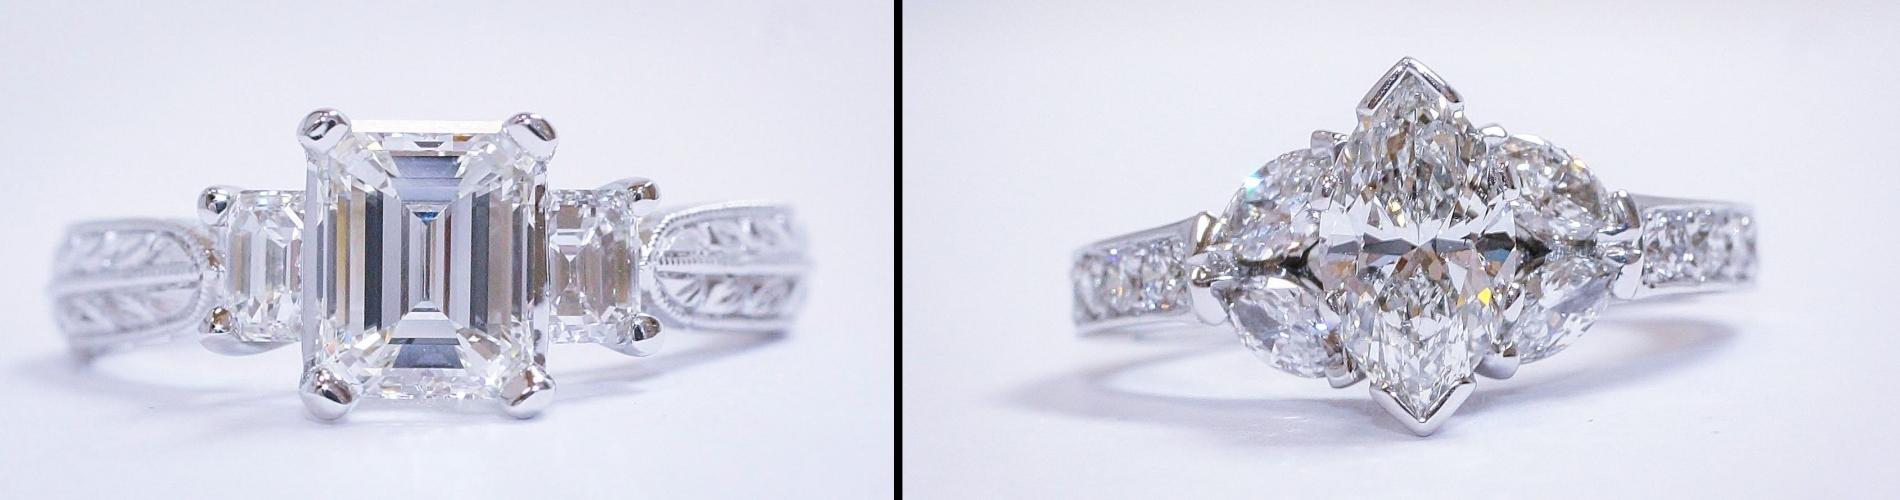 Where Can I Sell My Diamond Ring & Jewelry in Sacramento, CA?